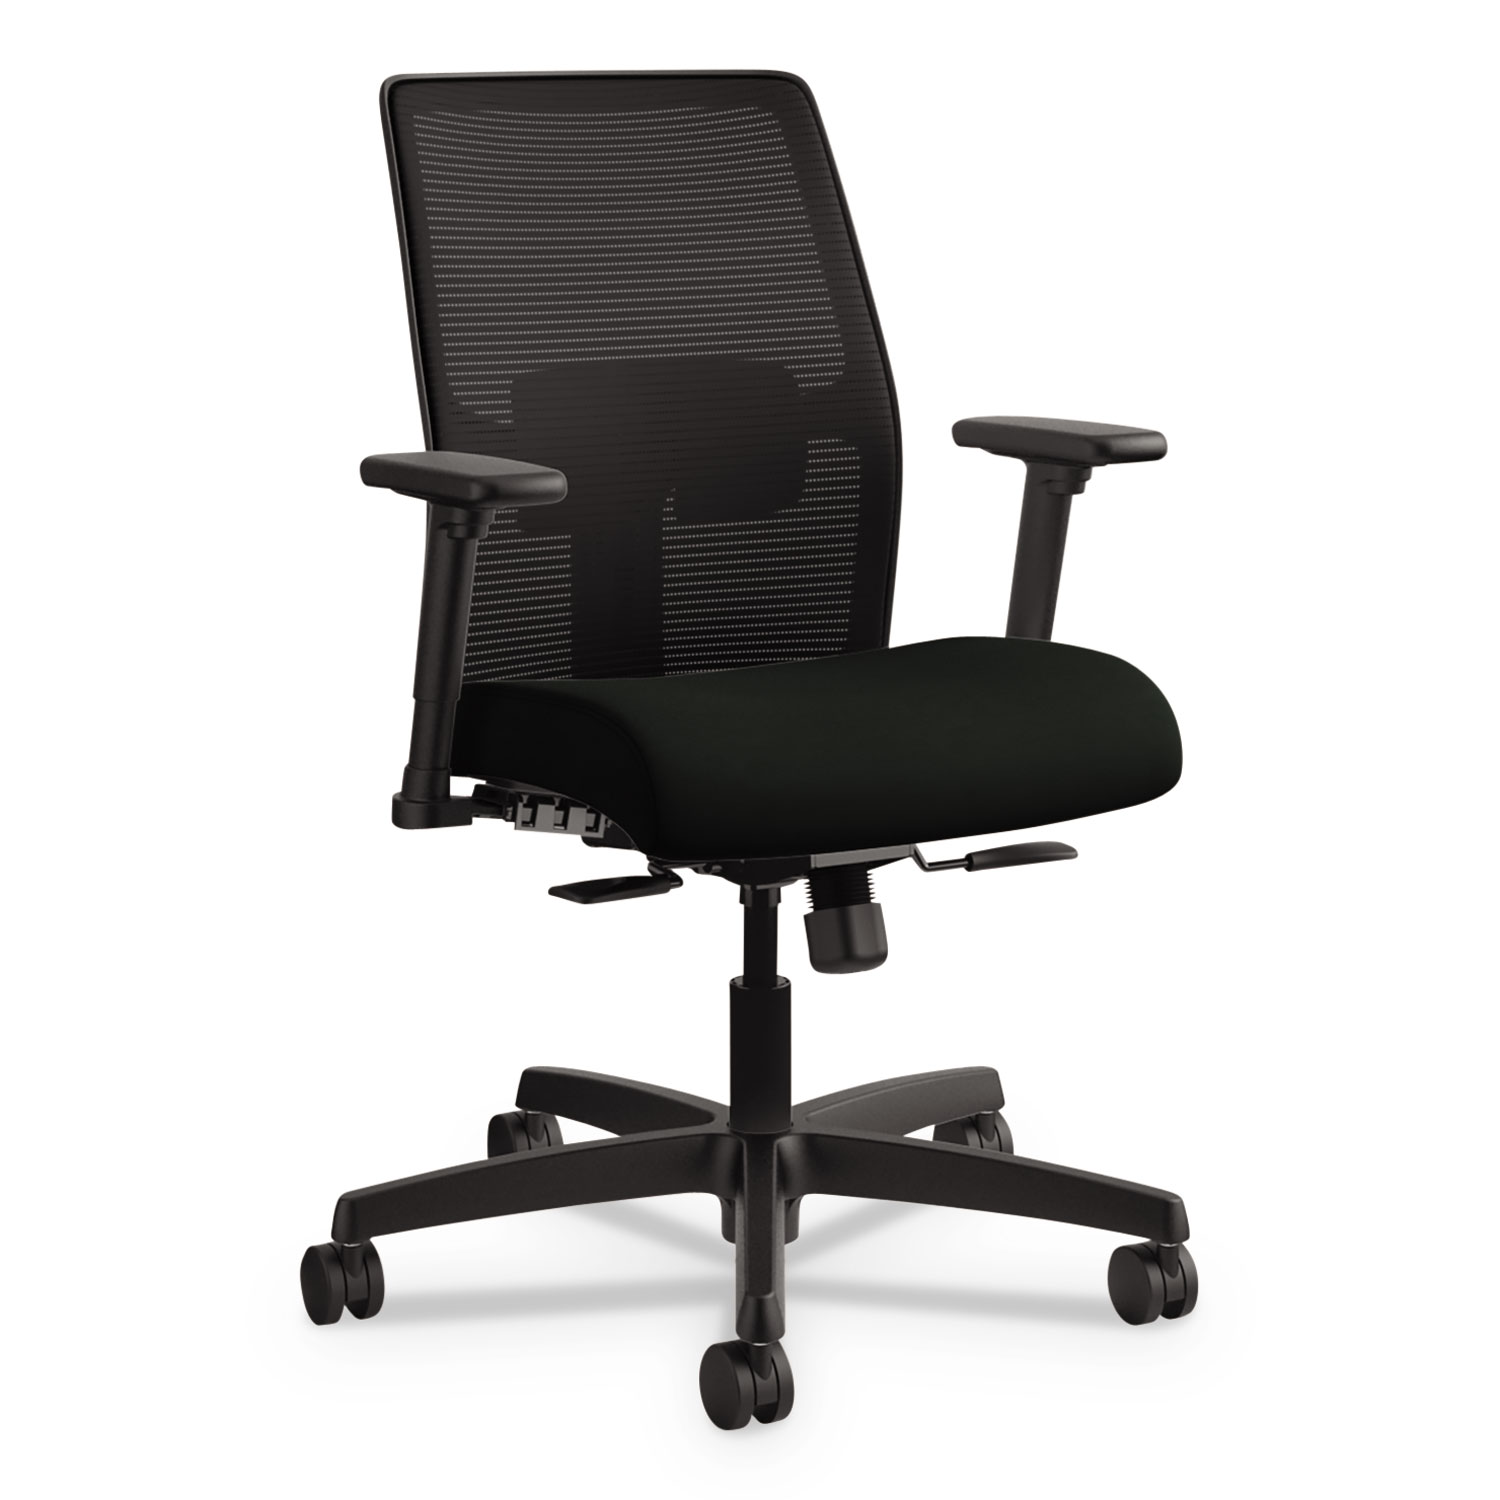  HON HONI2L1AMLU10TK Ignition 2.0 4-Way Stretch Low-Back Mesh Task Chair, Supports up to 300 lbs, Black Seat/Back, Black Base (HONI2L1AMLU10TK) 